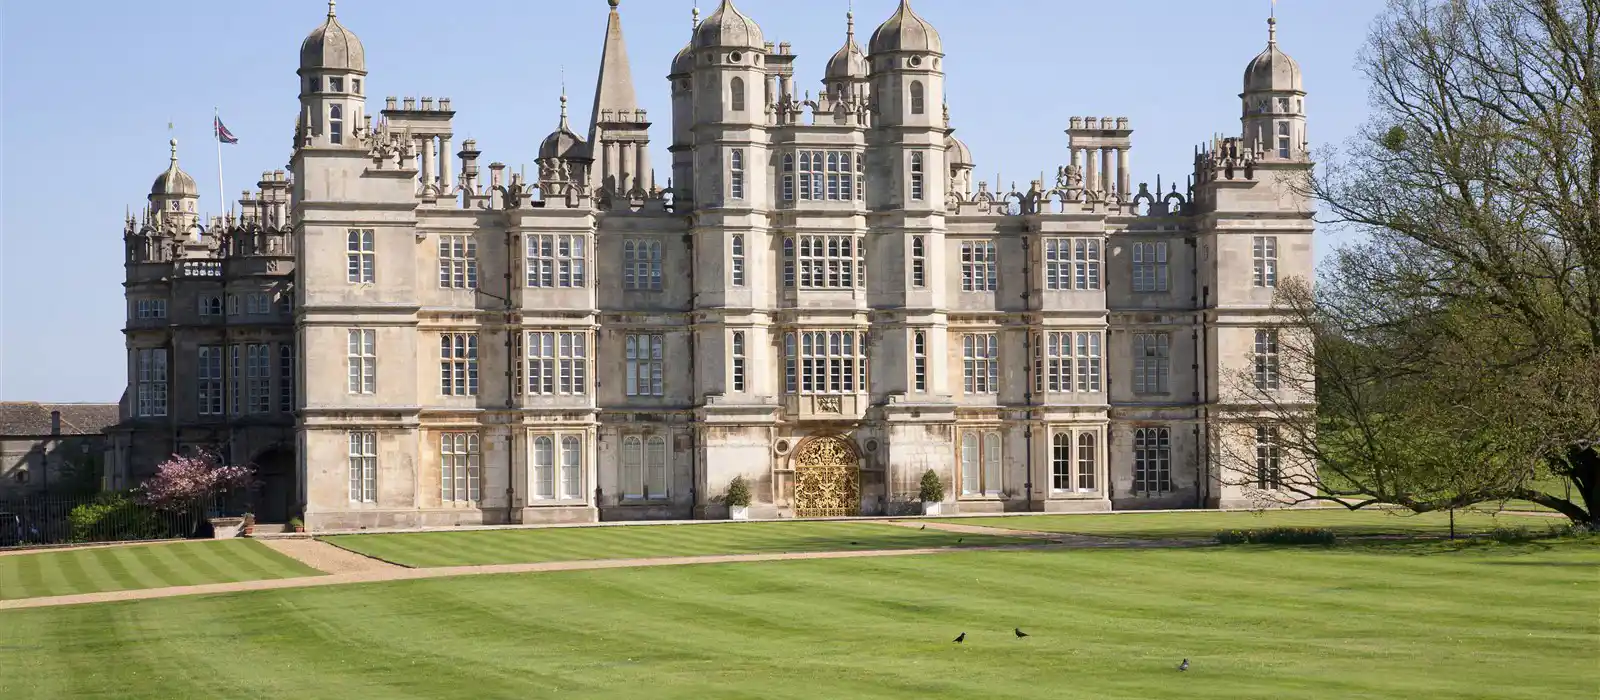 Burghley House in Lincolnshire